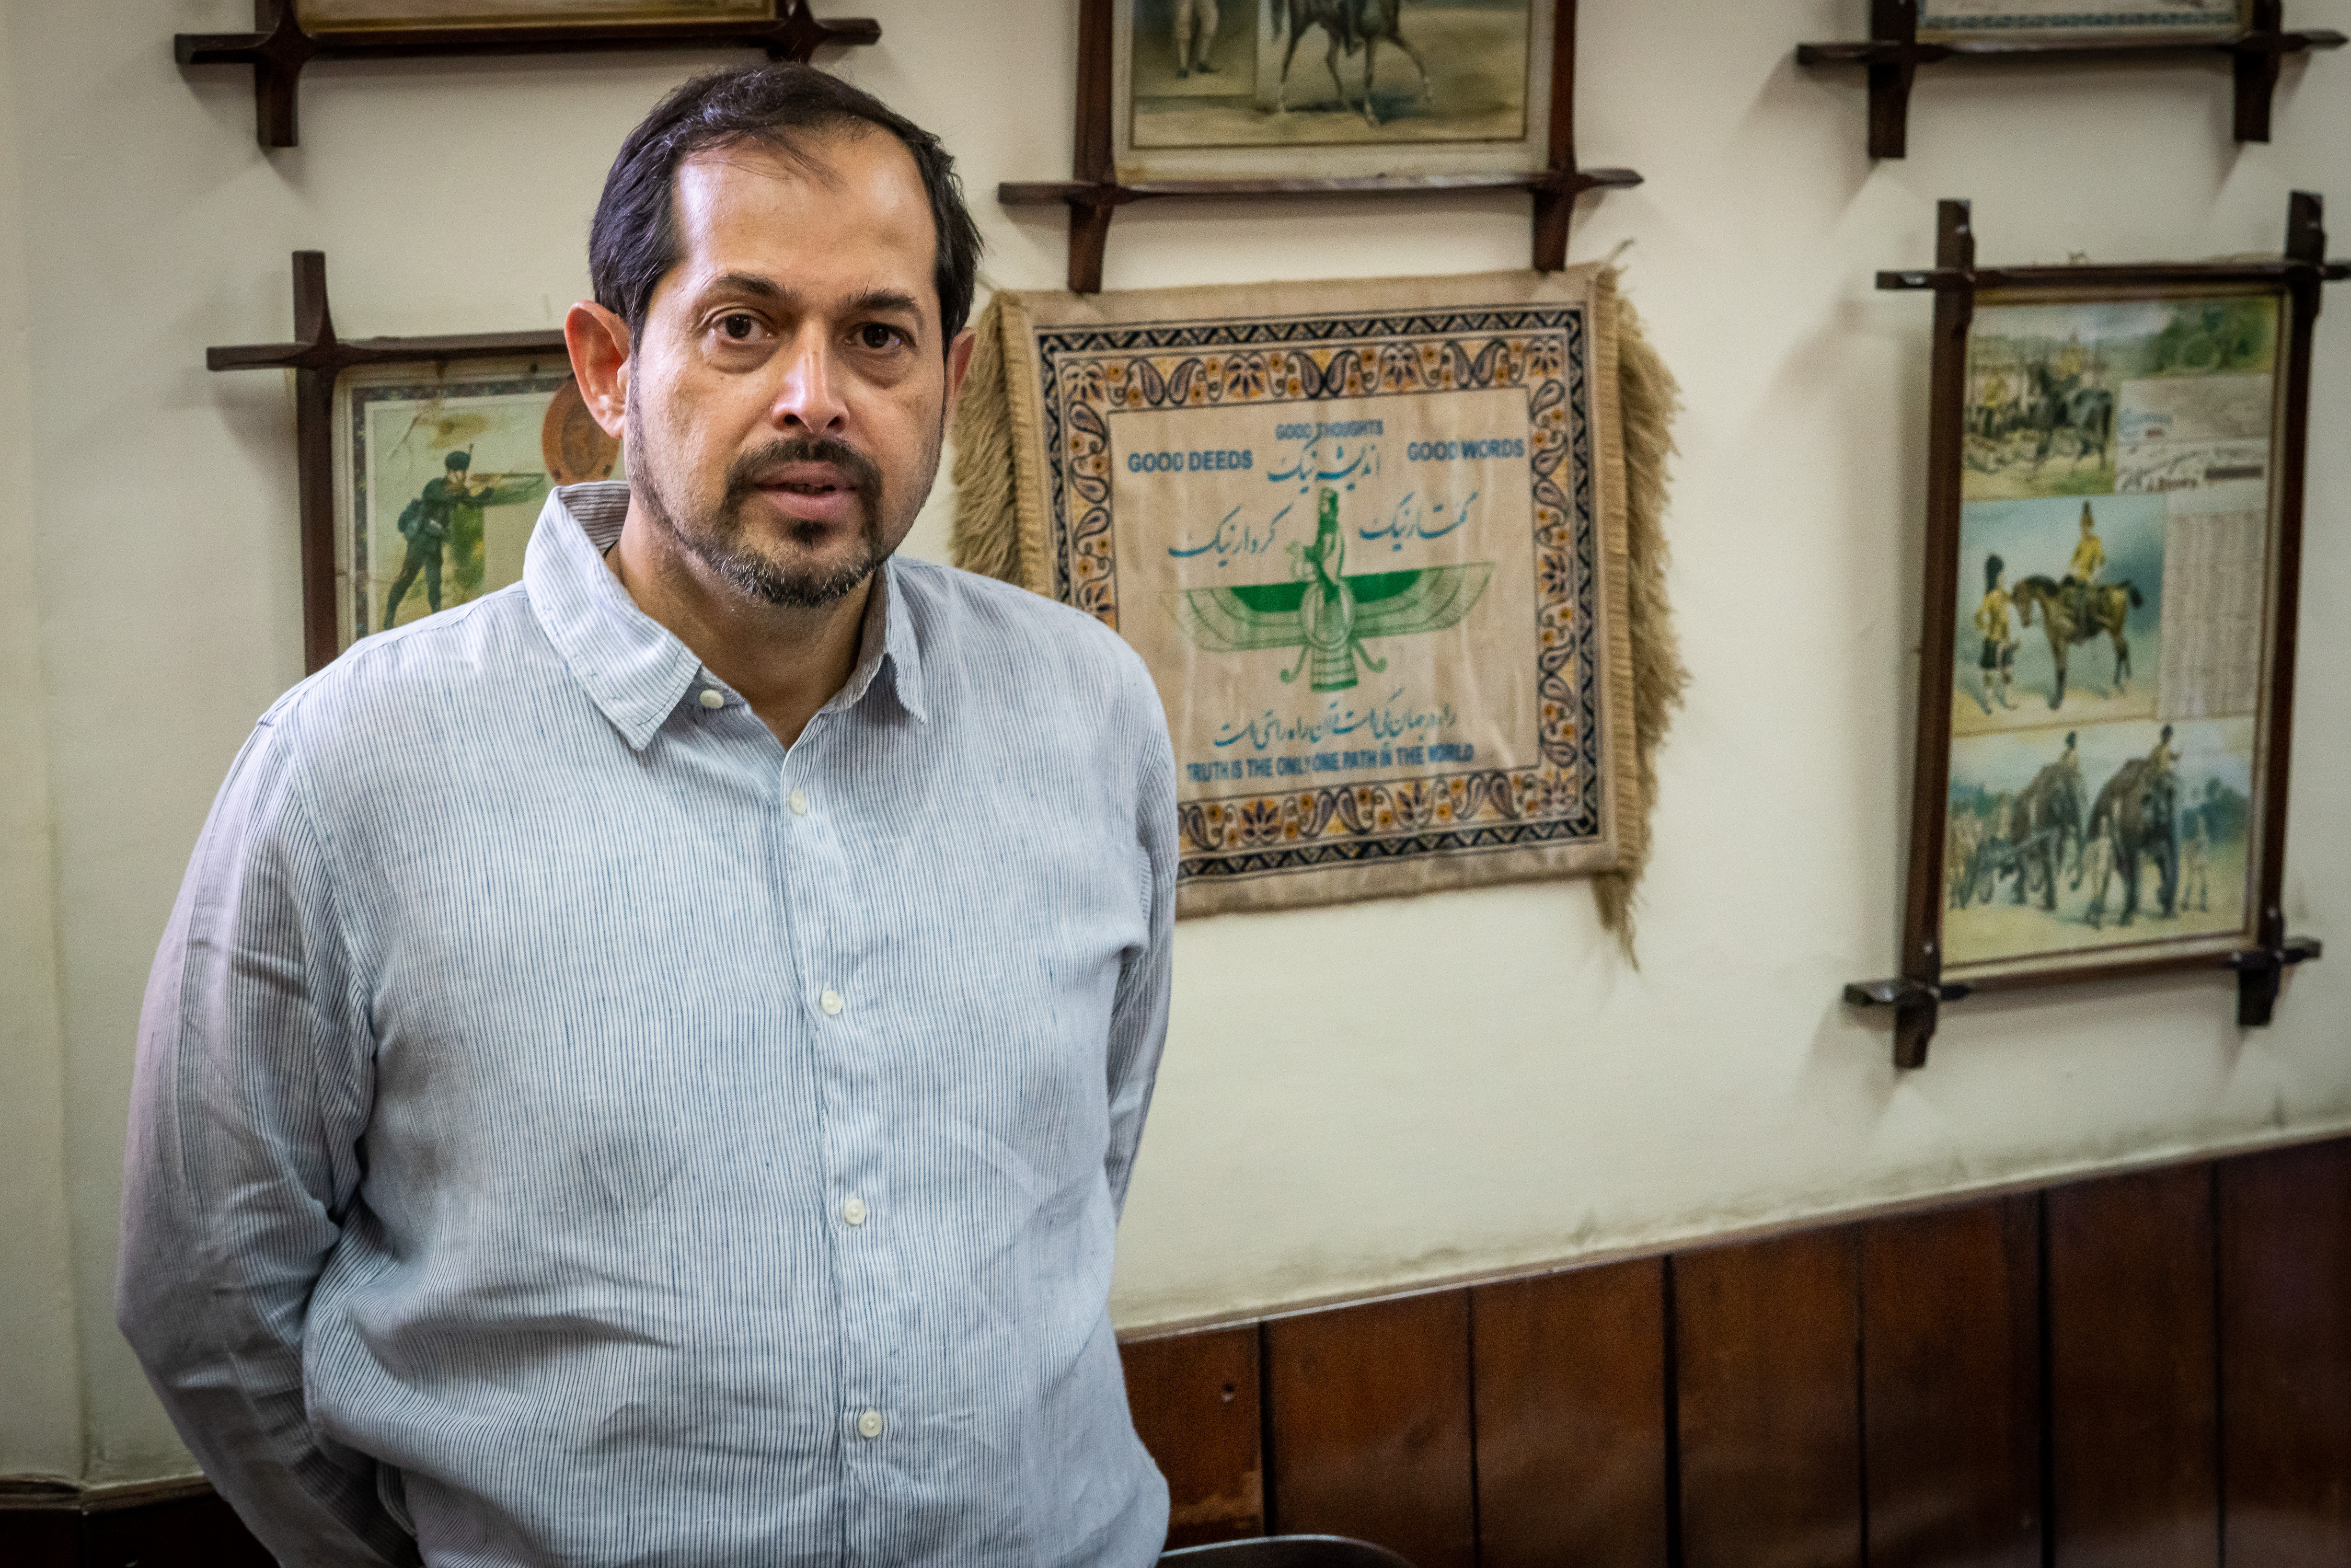 Isphanyar Bhandara poses in his office for a photo. Behind him is a wall-hanging displaying the main tenets of the Parsi faith: "Good thoughts, good deeds, good words" (photo: Philipp Breu)